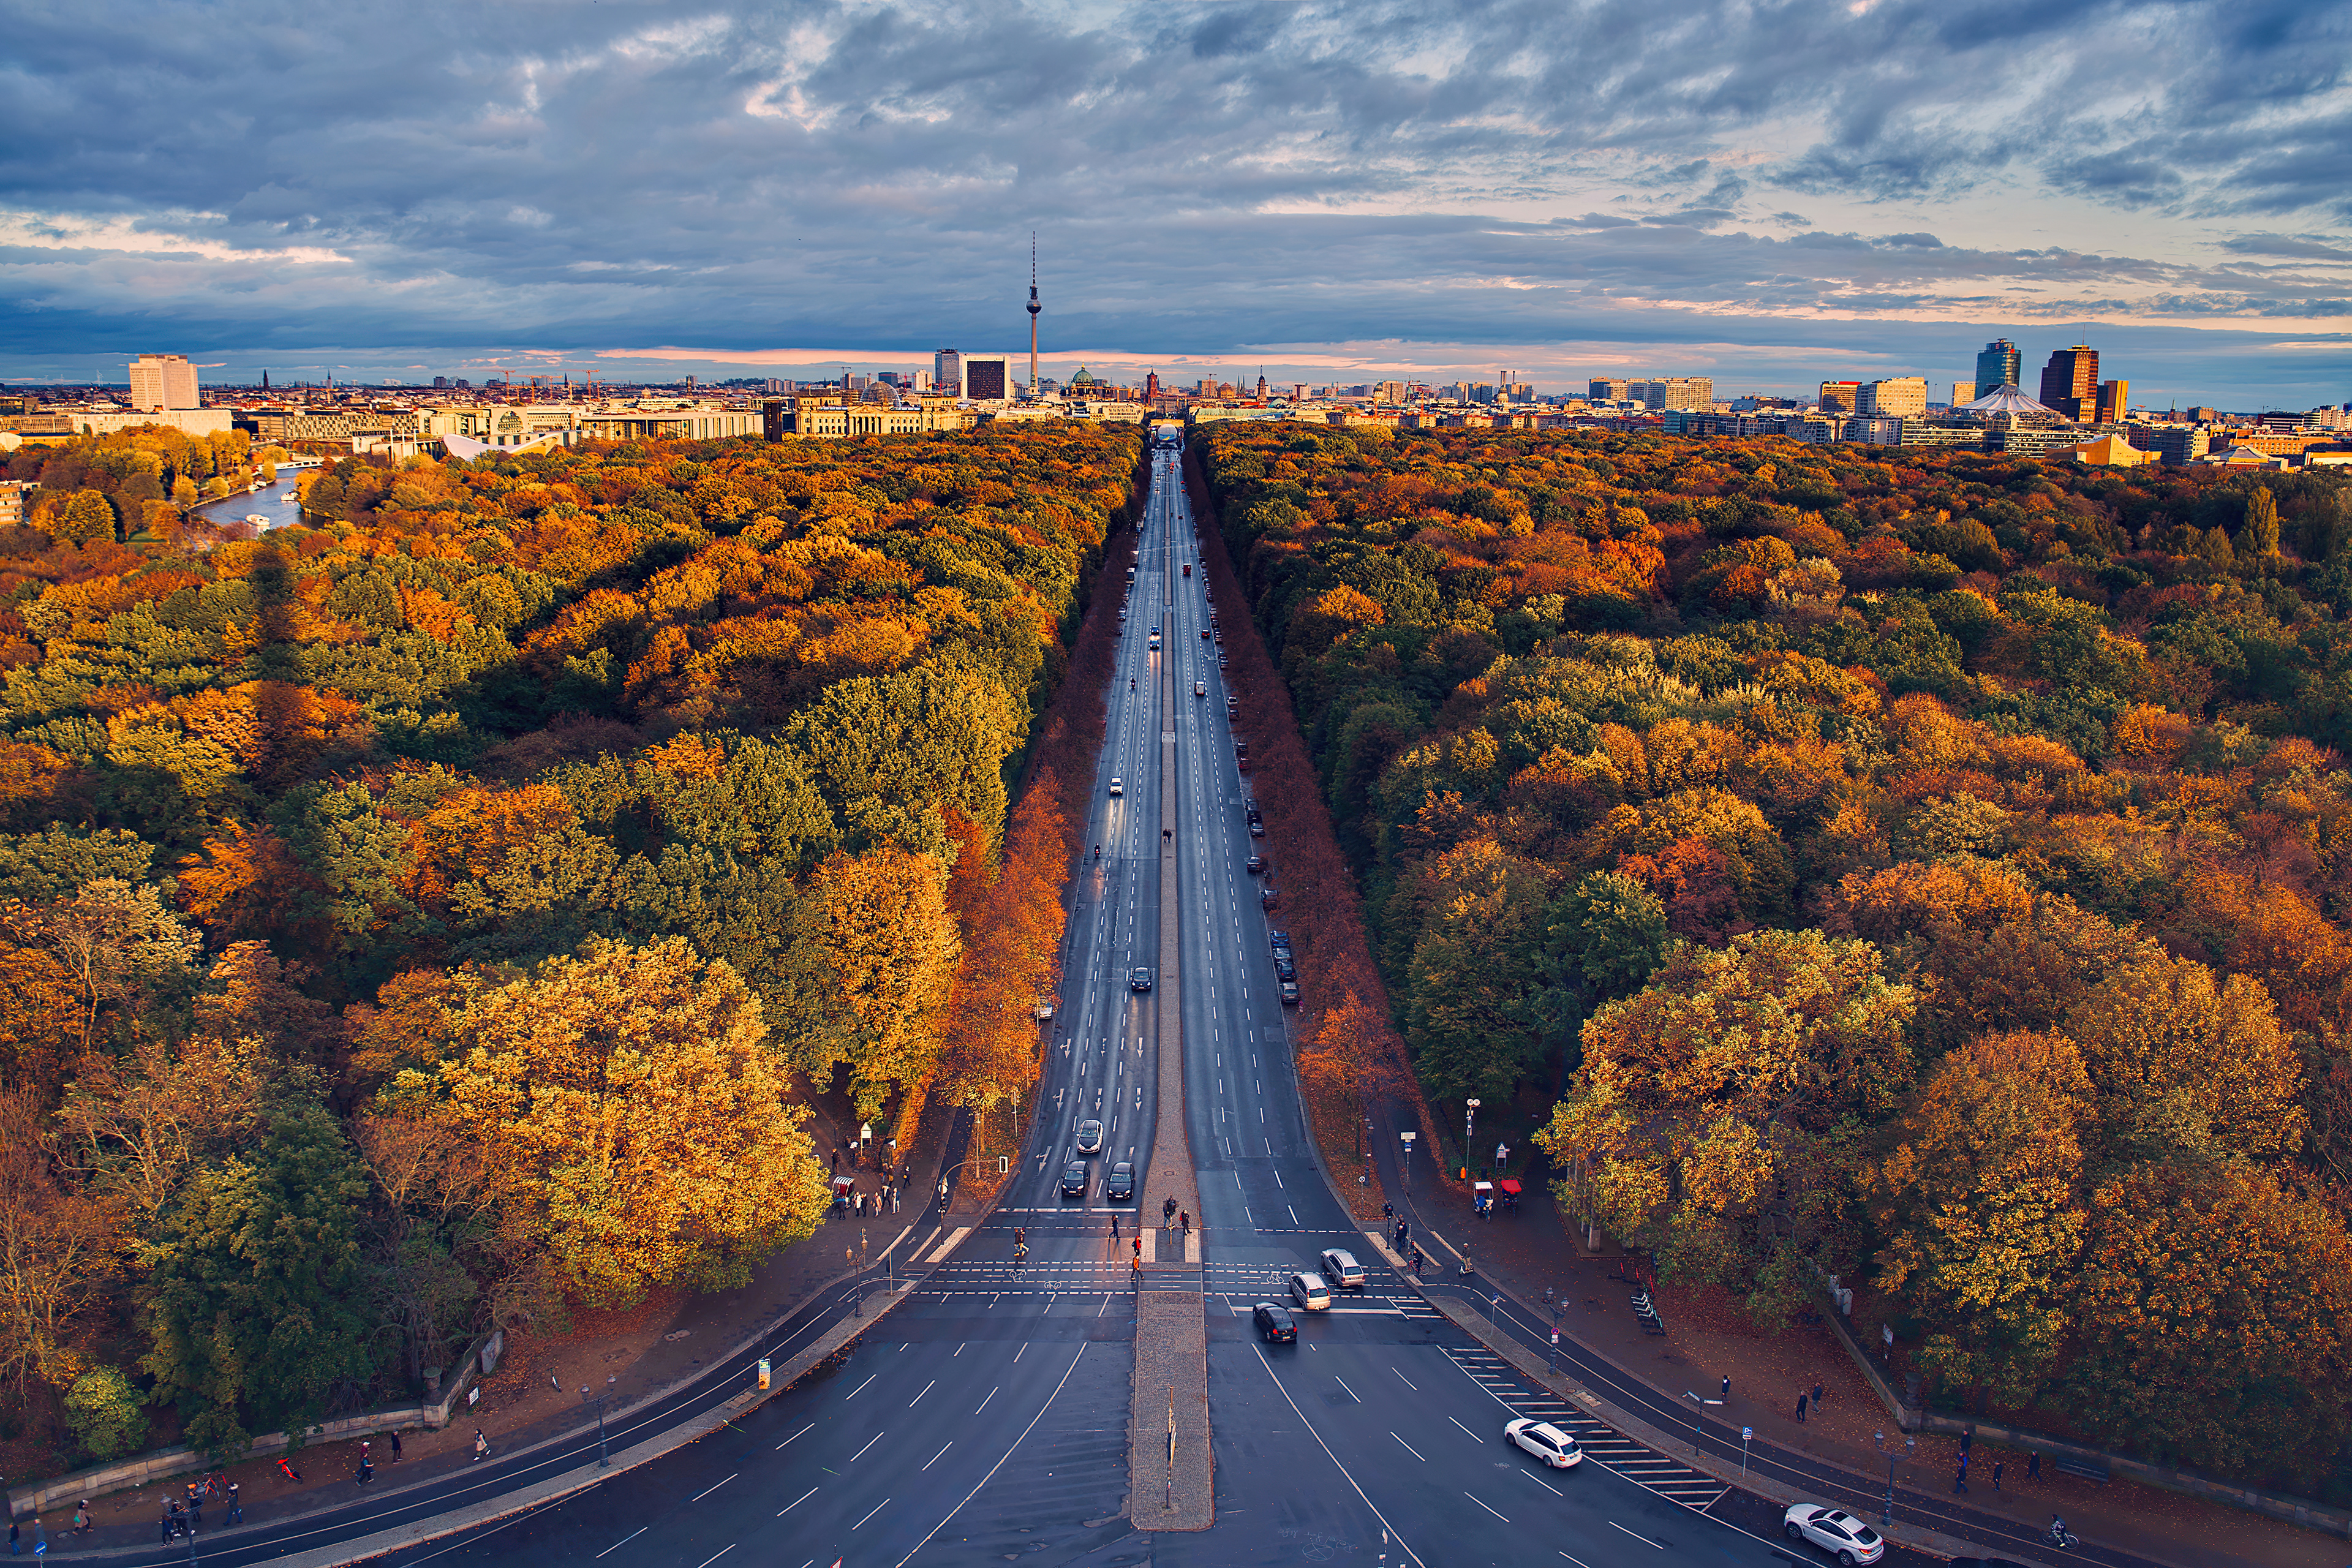 An autumn forest in the city with a highway running along it